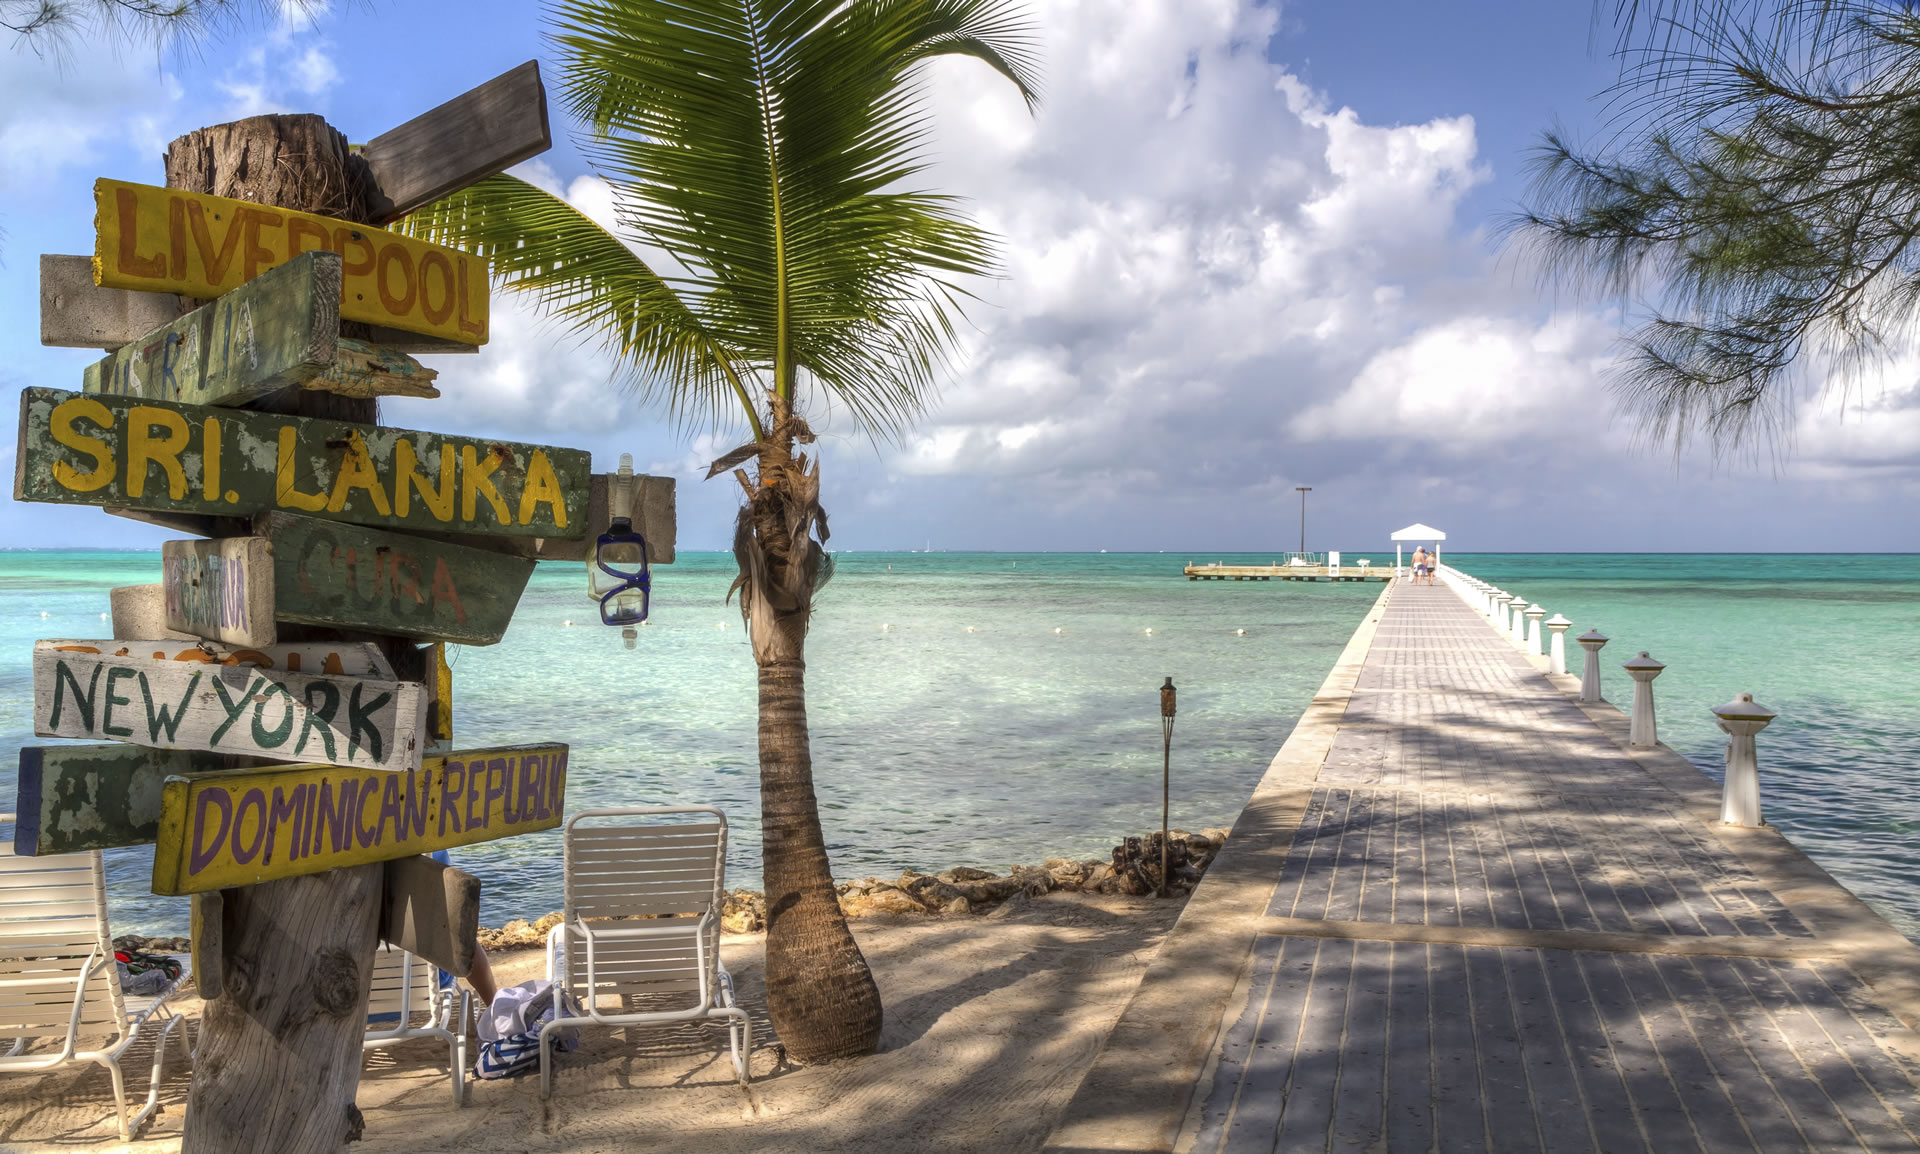 Signpost and pier at Rum Point Beach on Grand Cayman in the Cayman Islands..